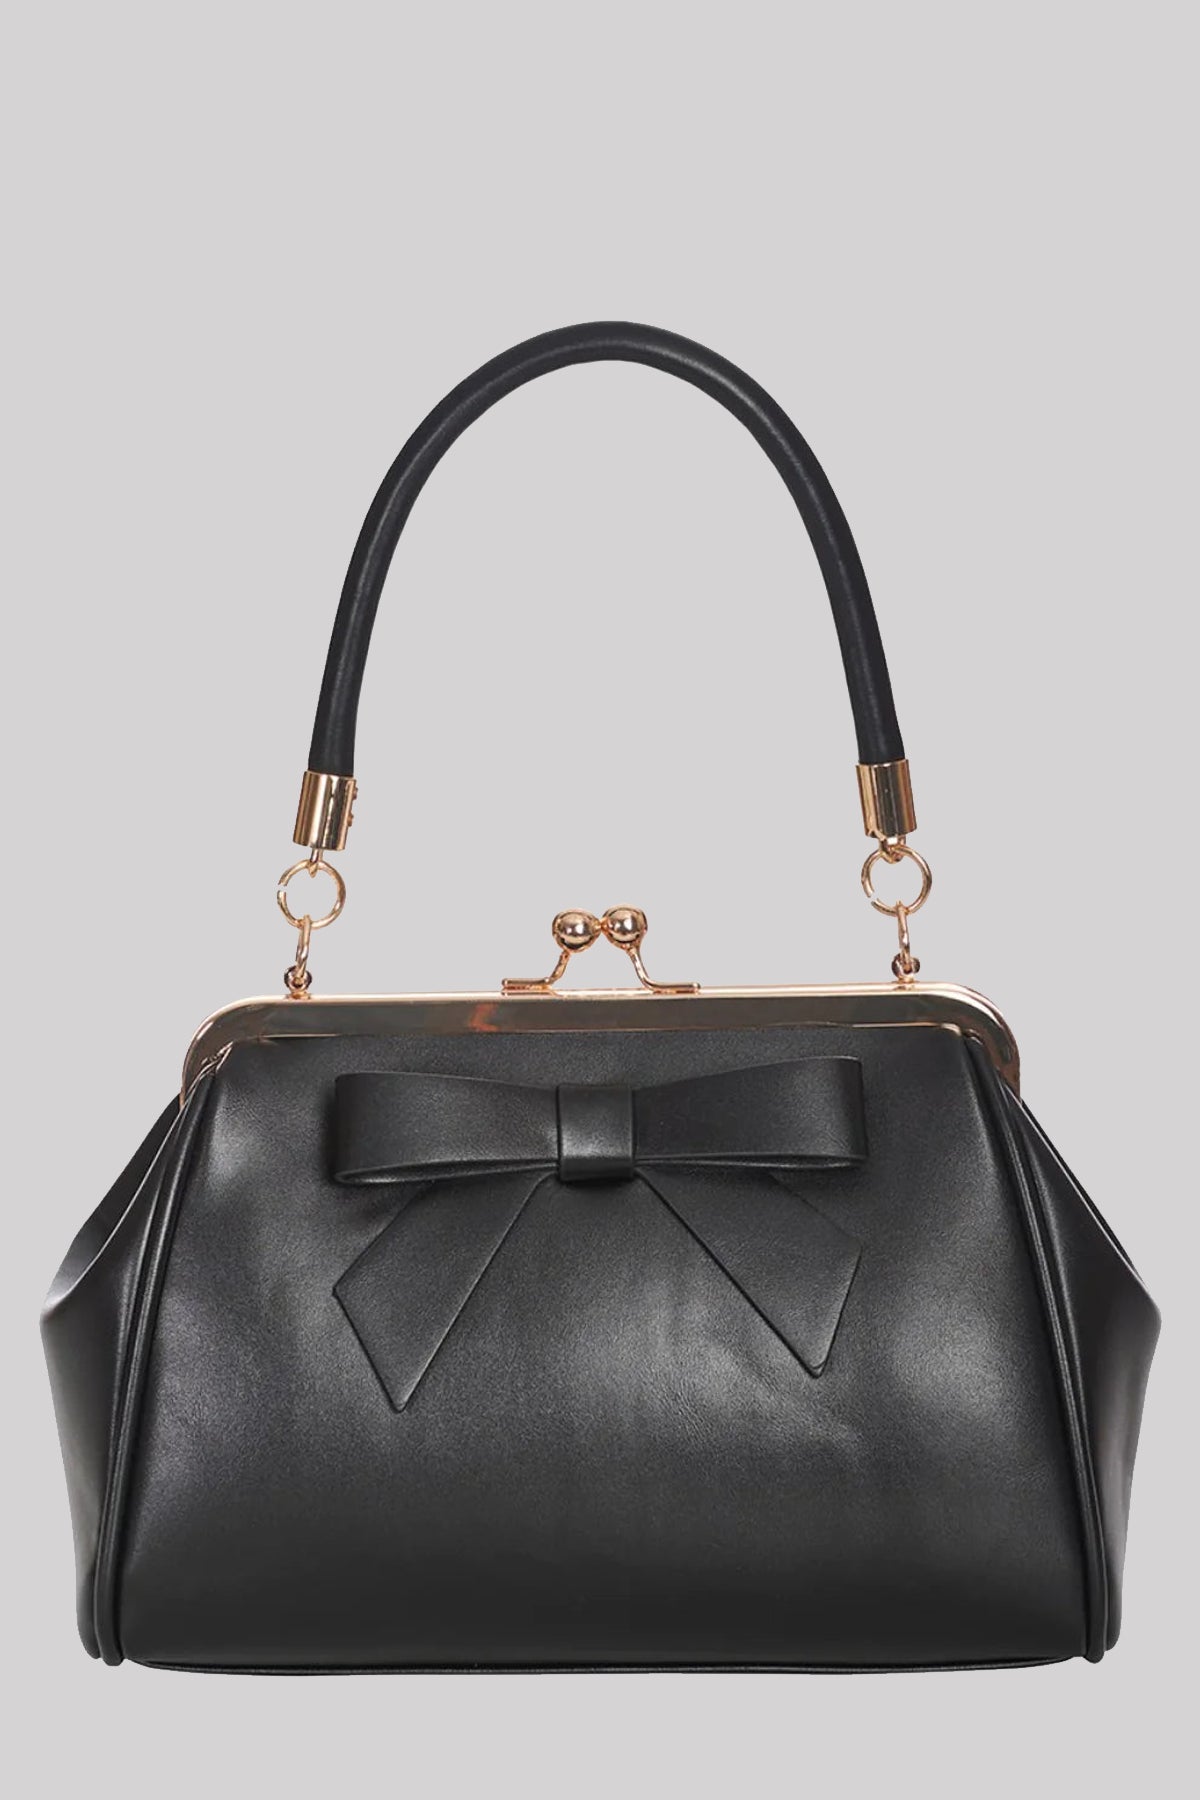 Banned Daydream 1950'S Retro Faux Leather Bow Bag